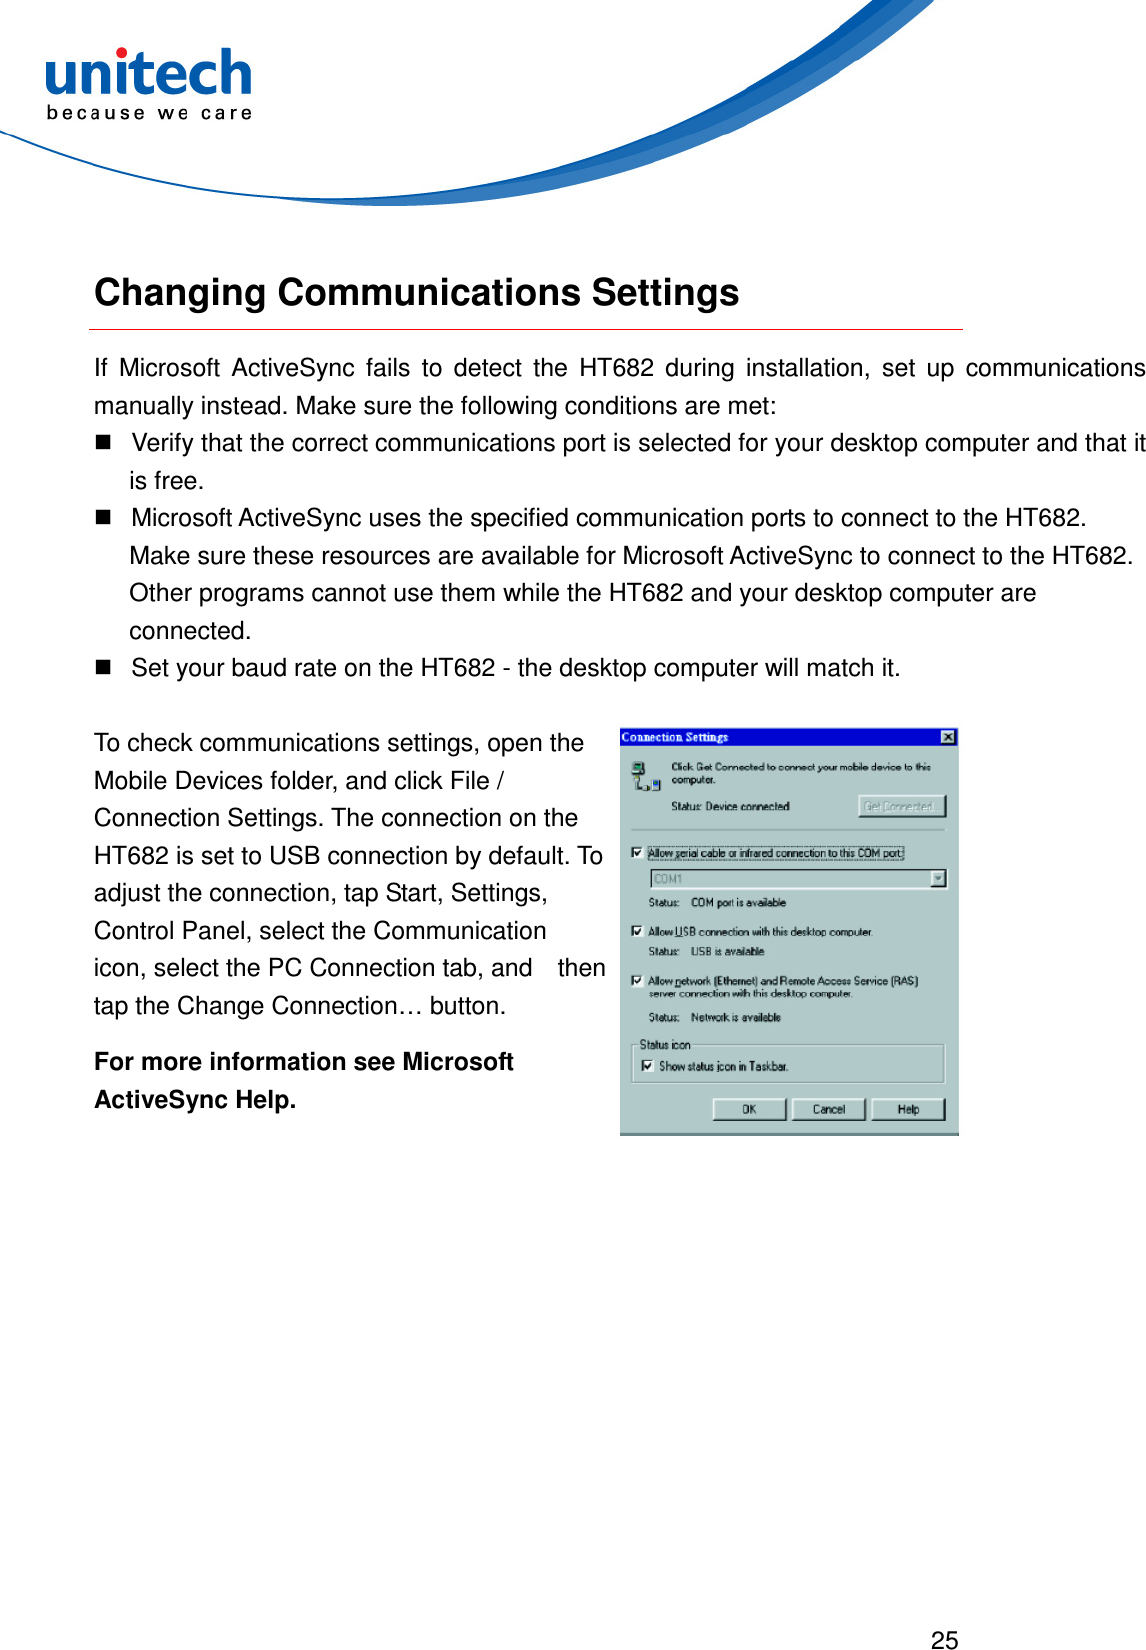  25   Changing Communications Settings If  Microsoft  ActiveSync  fails  to  detect  the  HT682  during  installation,  set  up  communications manually instead. Make sure the following conditions are met:   Verify that the correct communications port is selected for your desktop computer and that it is free.   Microsoft ActiveSync uses the specified communication ports to connect to the HT682. Make sure these resources are available for Microsoft ActiveSync to connect to the HT682. Other programs cannot use them while the HT682 and your desktop computer are connected.   Set your baud rate on the HT682 - the desktop computer will match it. To check communications settings, open the Mobile Devices folder, and click File / Connection Settings. The connection on the HT682 is set to USB connection by default. To   adjust the connection, tap Start, Settings, Control Panel, select the Communication   icon, select the PC Connection tab, and    then tap the Change Connection… button. For more information see Microsoft ActiveSync Help.  